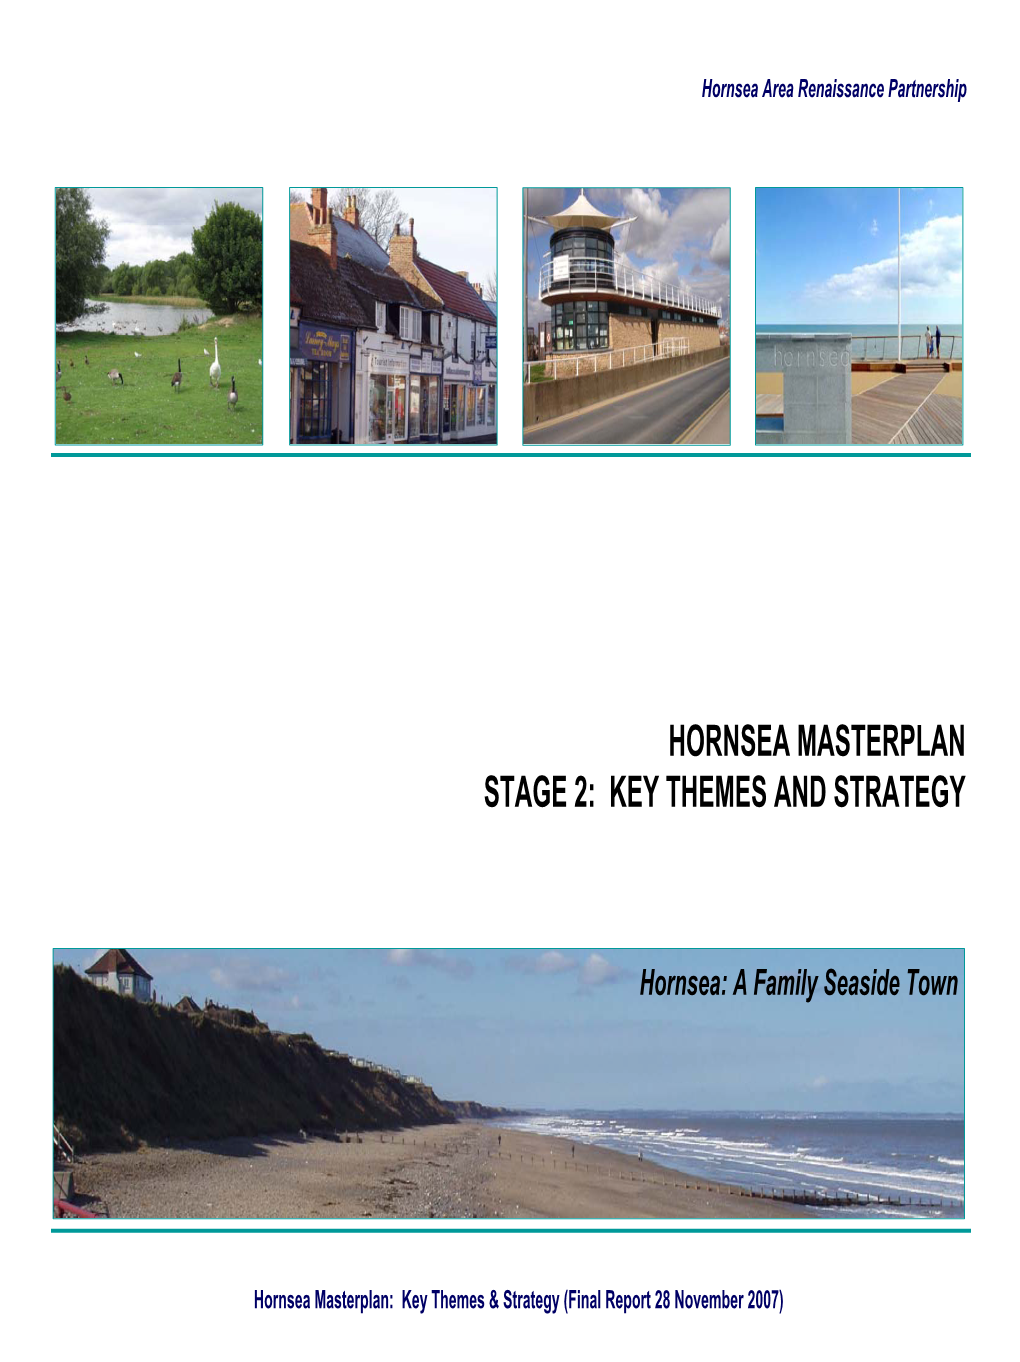 Hornsea Masterplan Stage 2: Key Themes and Strategy